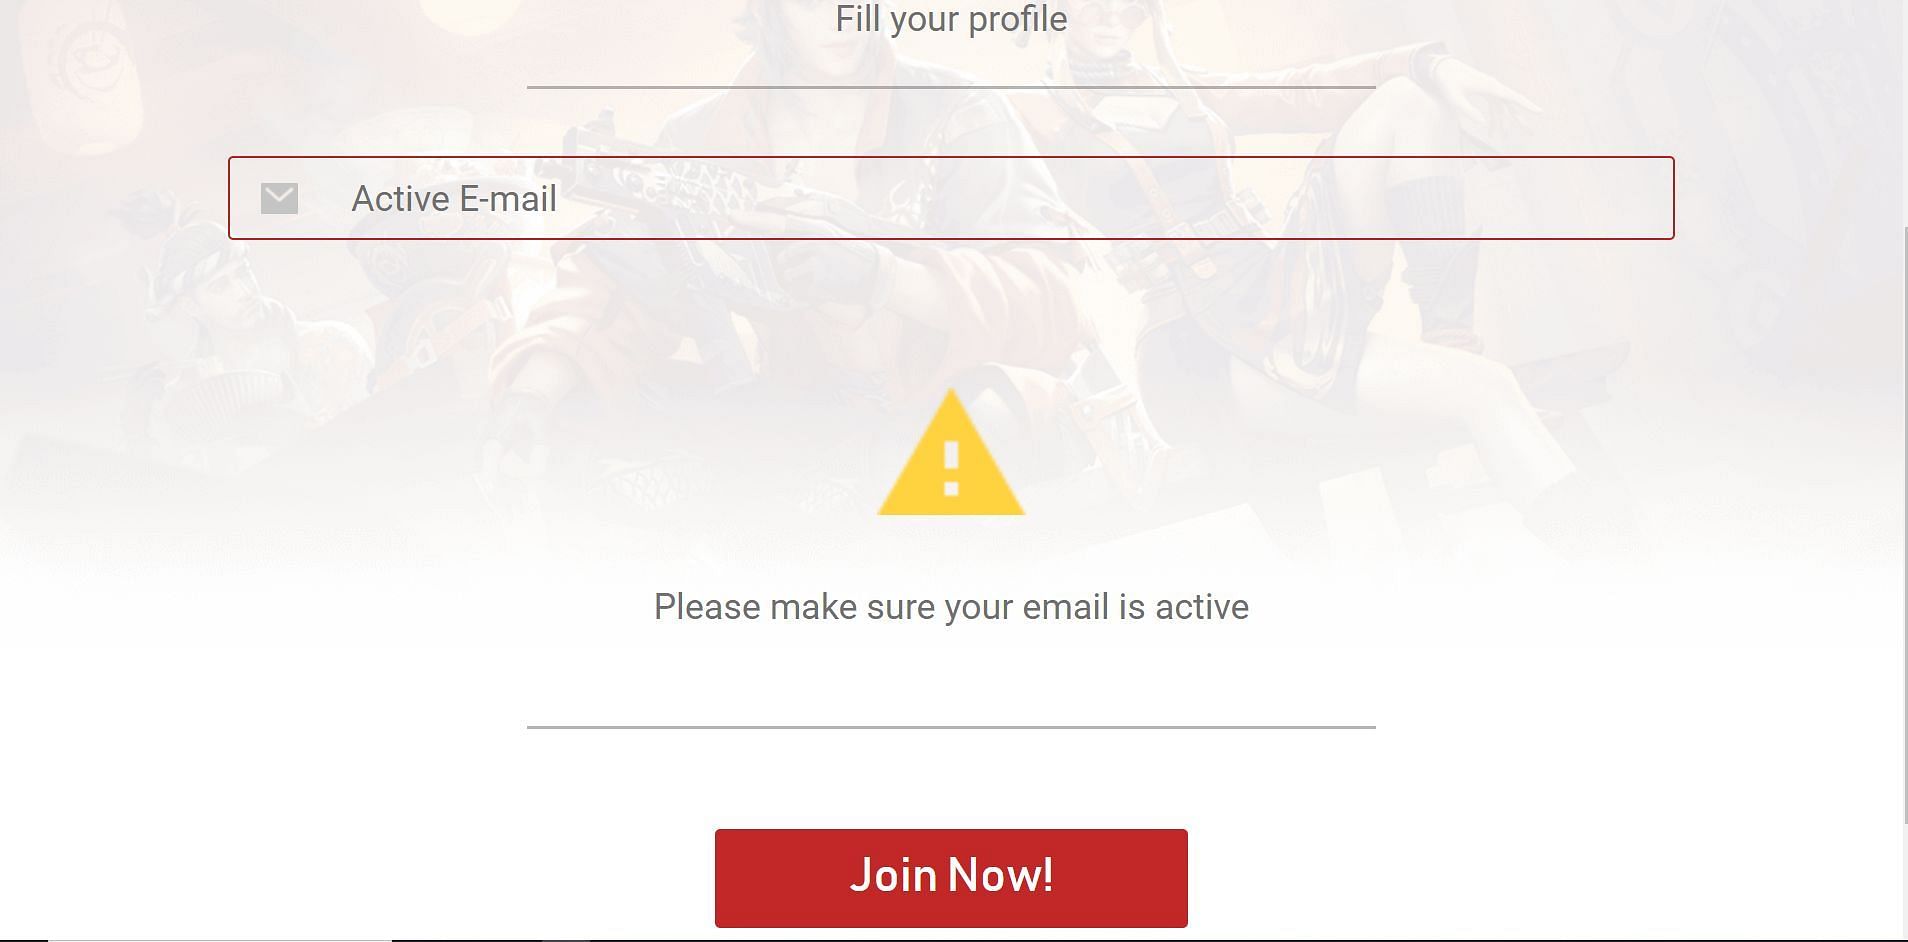 Enter the email ID and press Join Now! (Image via Garena)